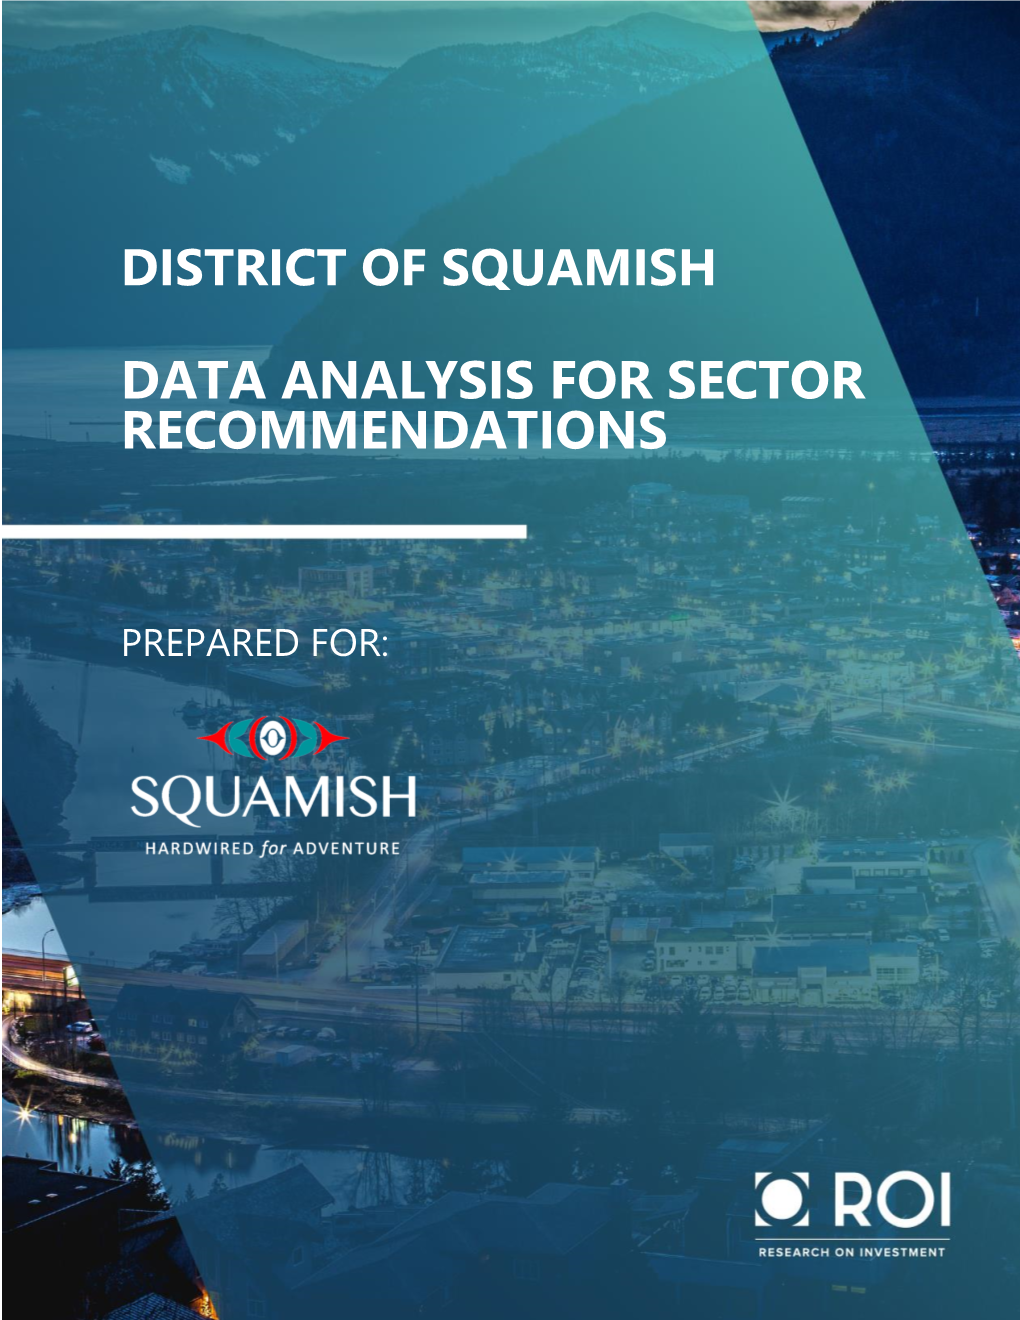 Data Analysis for Sector Recommendations